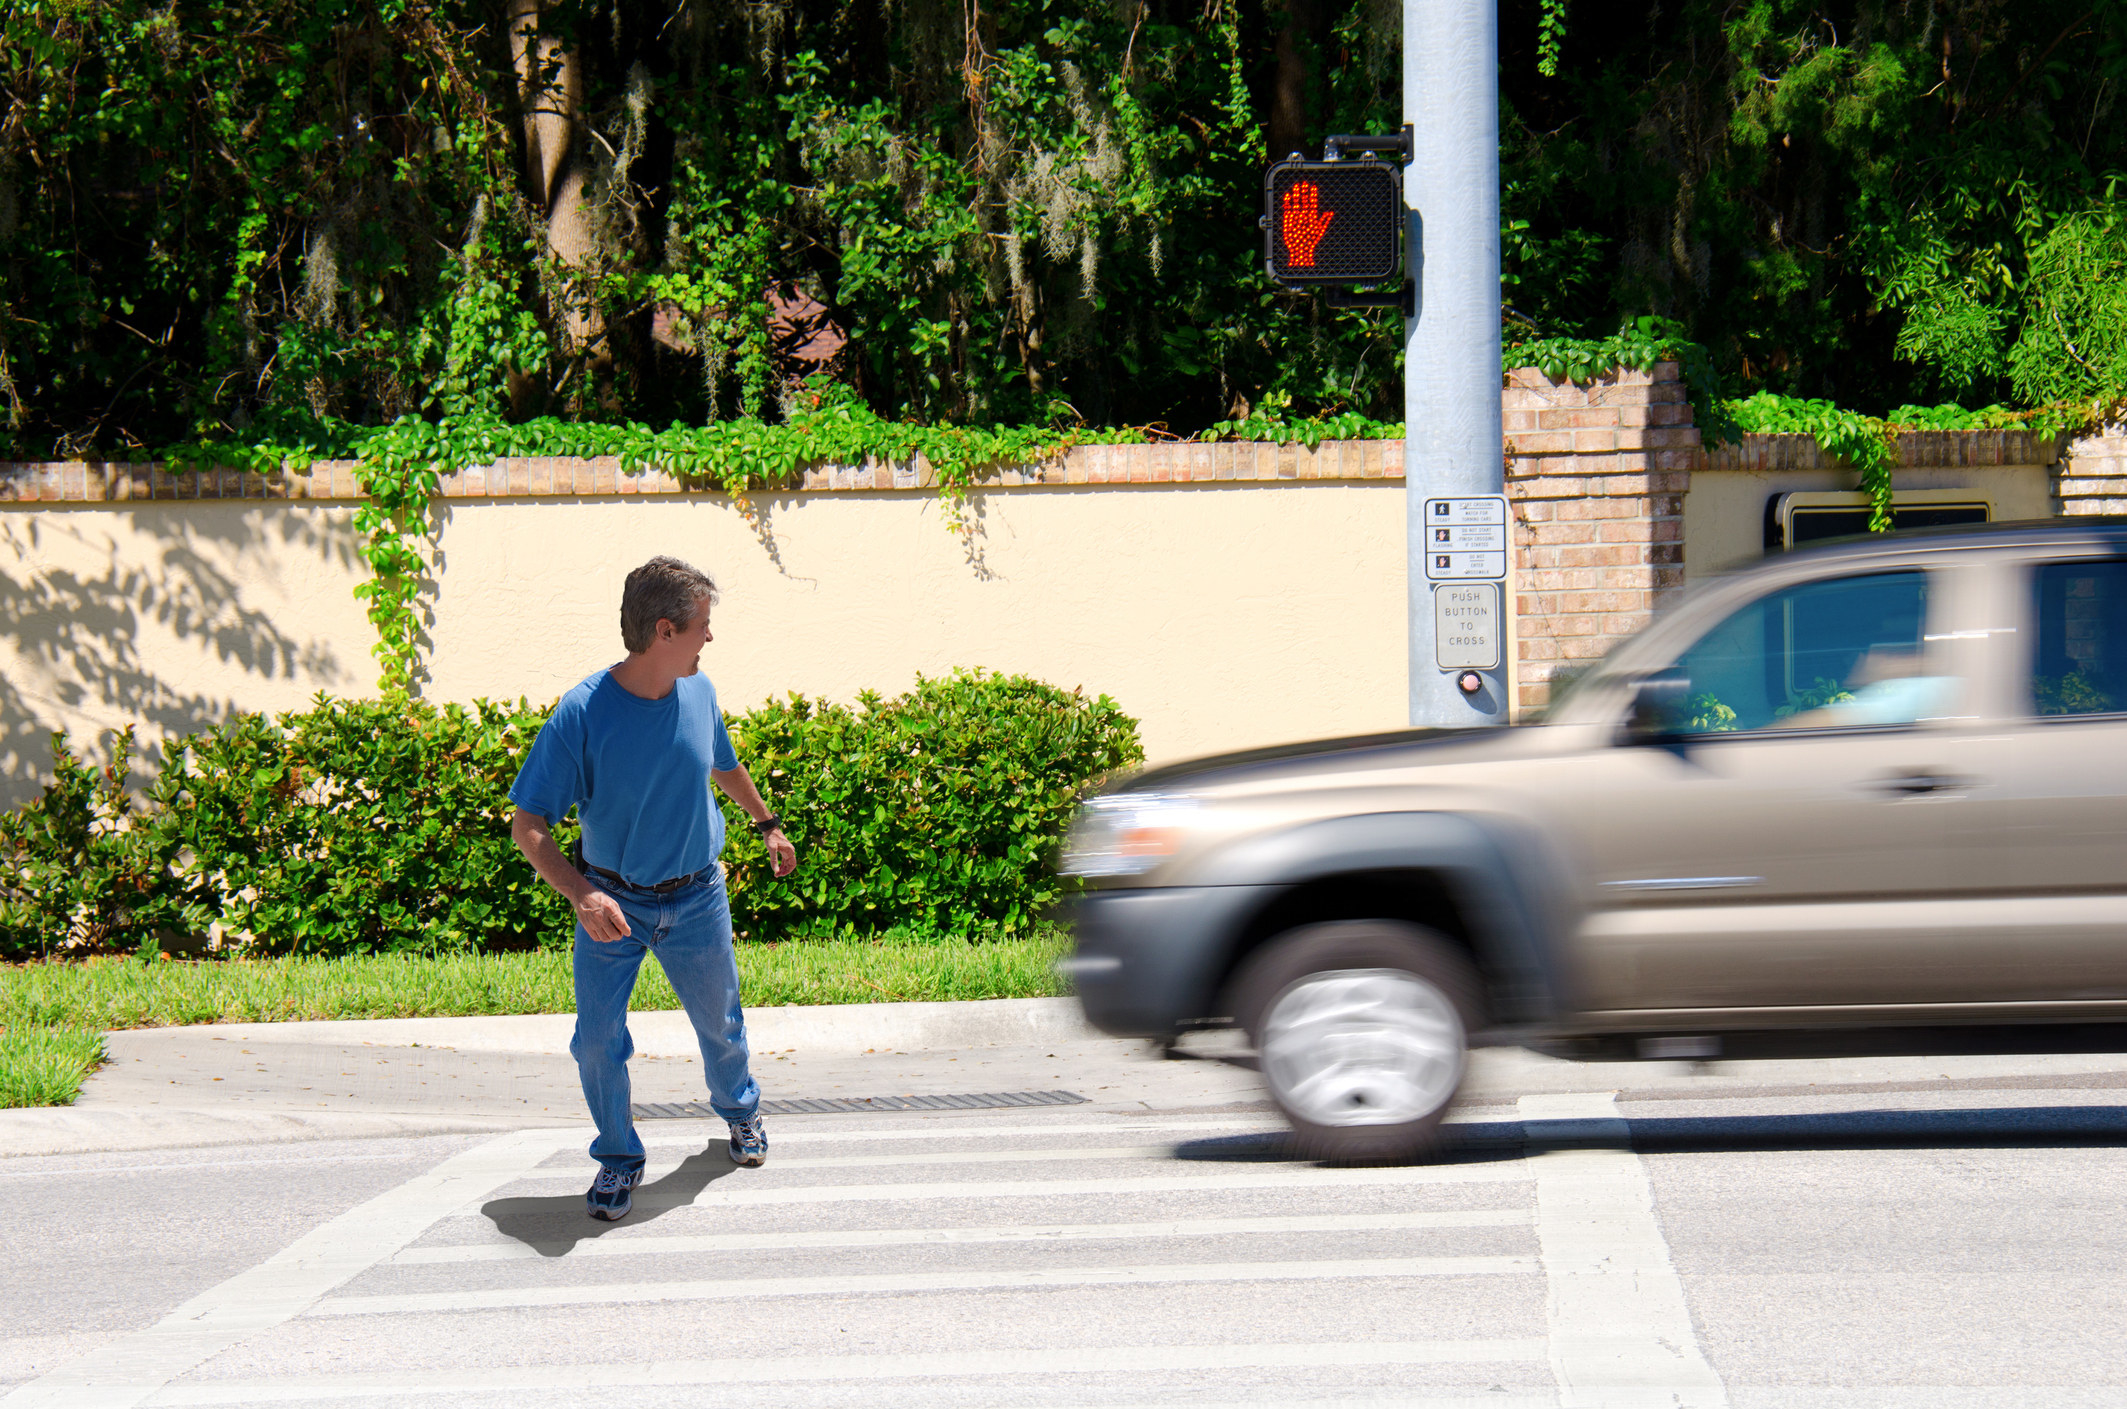 Man crossing the street at a crosswalk against a red light as a car goes by him